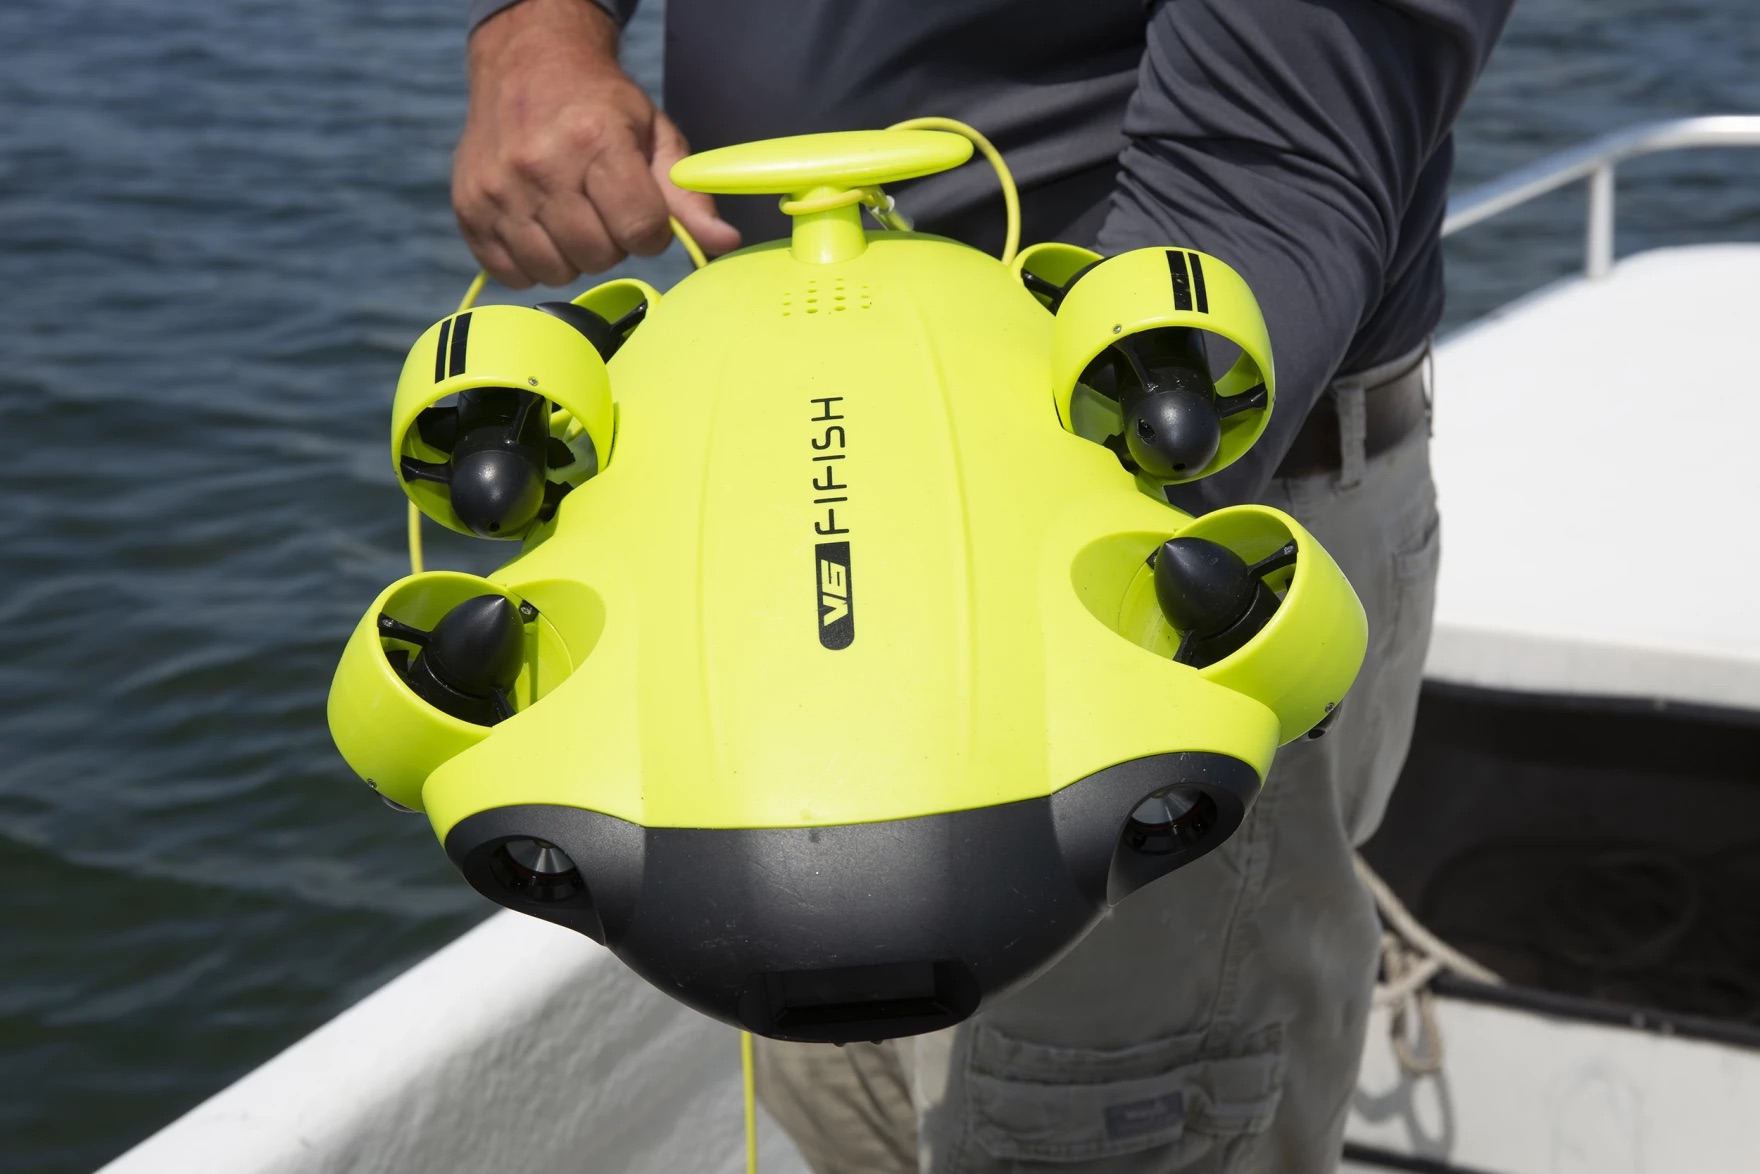 a small bulbous robot submersible, about two feet long, held by someone on a boat. it has four small propellers, two on each side, and two cameras on the front, resembling eyes on a face